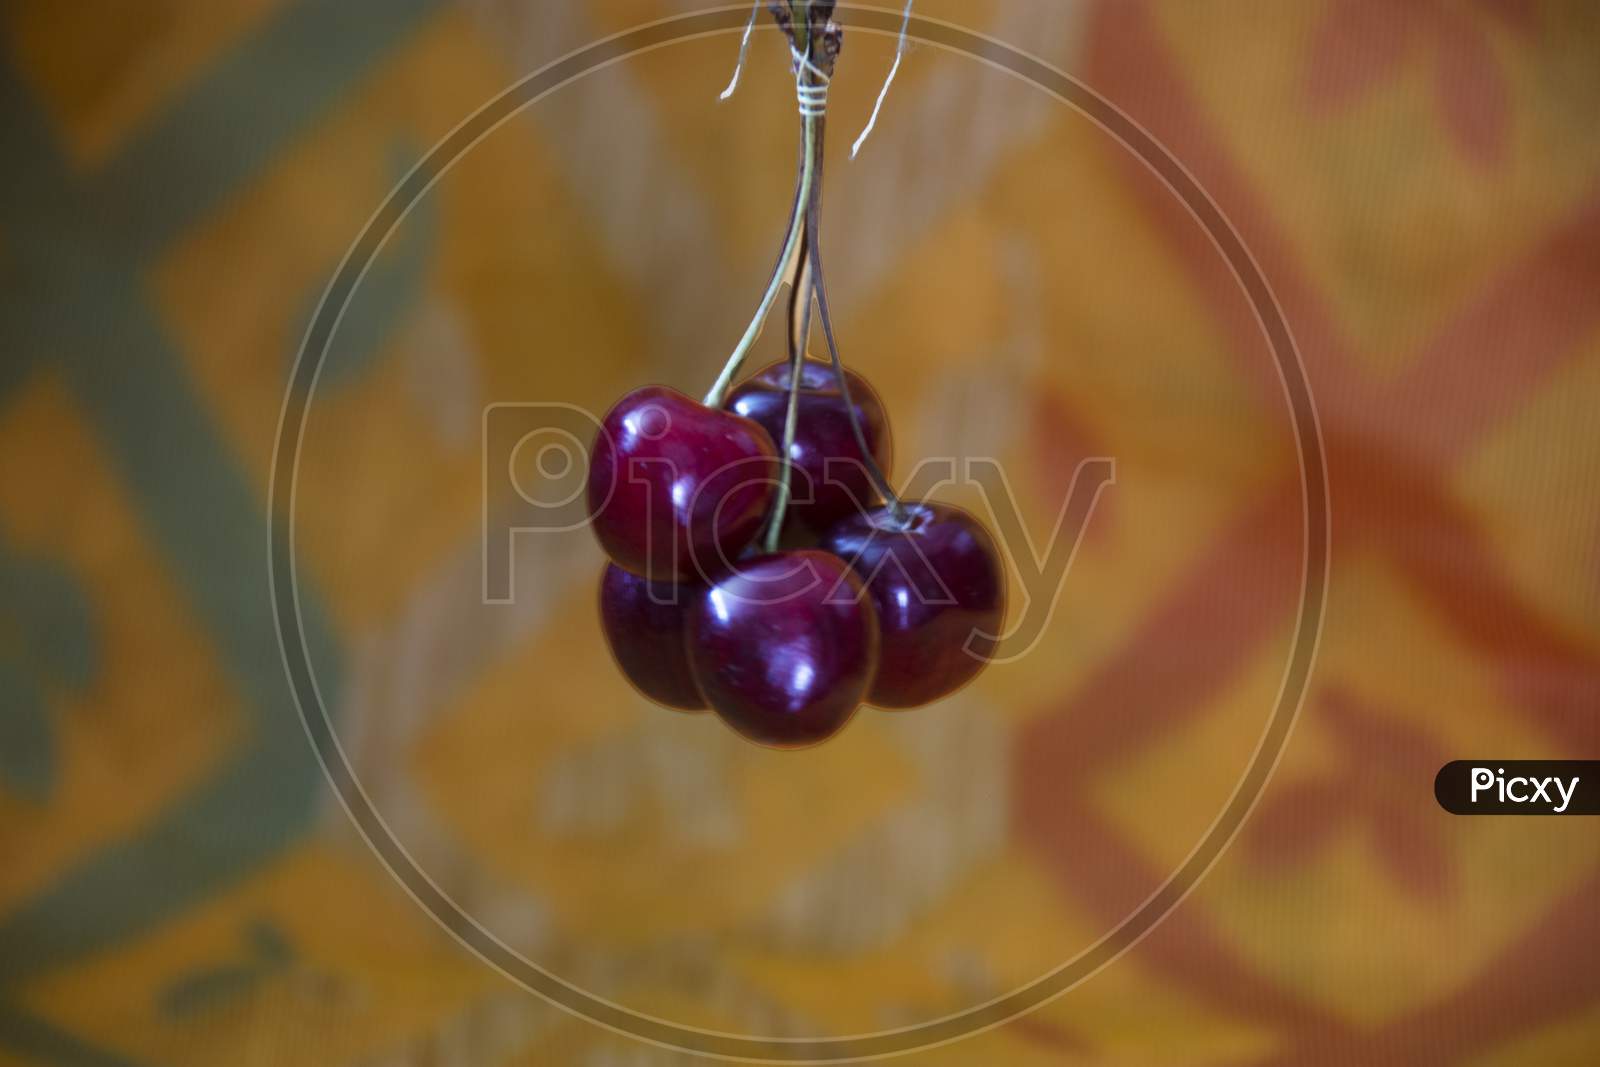 A Cherry Is The Fruit Of Many Plants Of The Genus Prunus, And Is A Fleshy Drupe